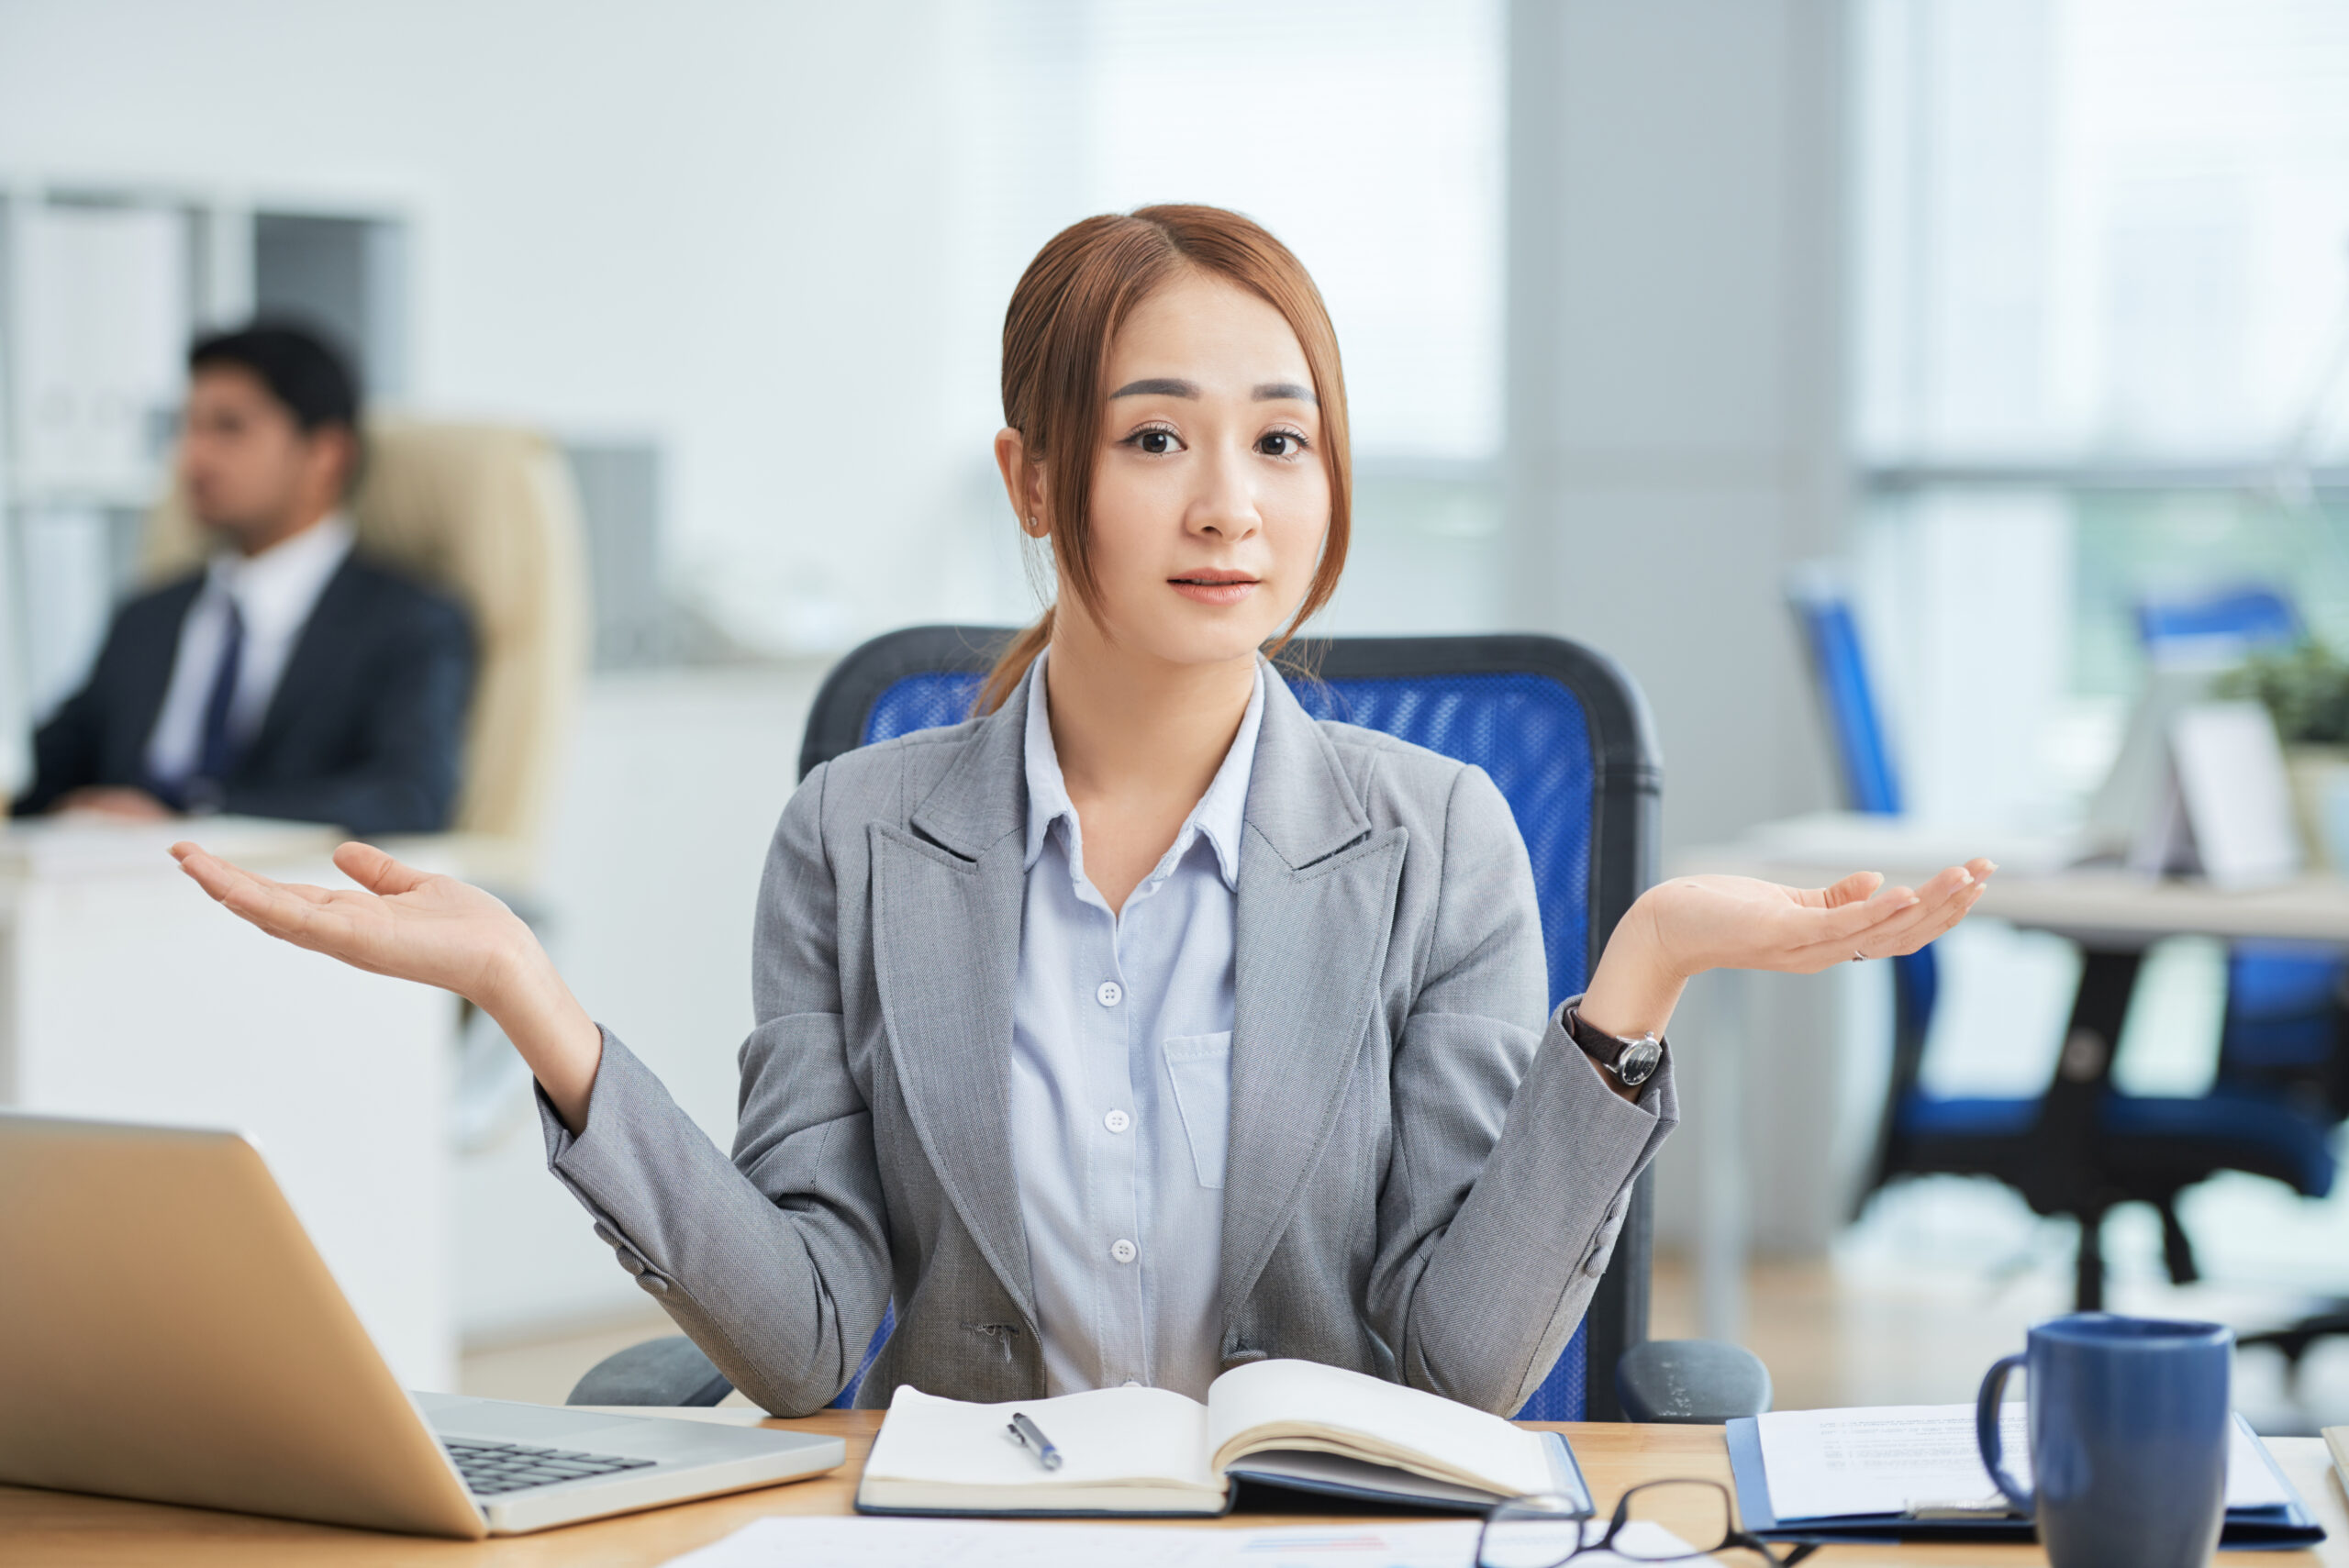 asian-woman-sitting-desk-office-looking-camera-with-helpless-hand-gesture